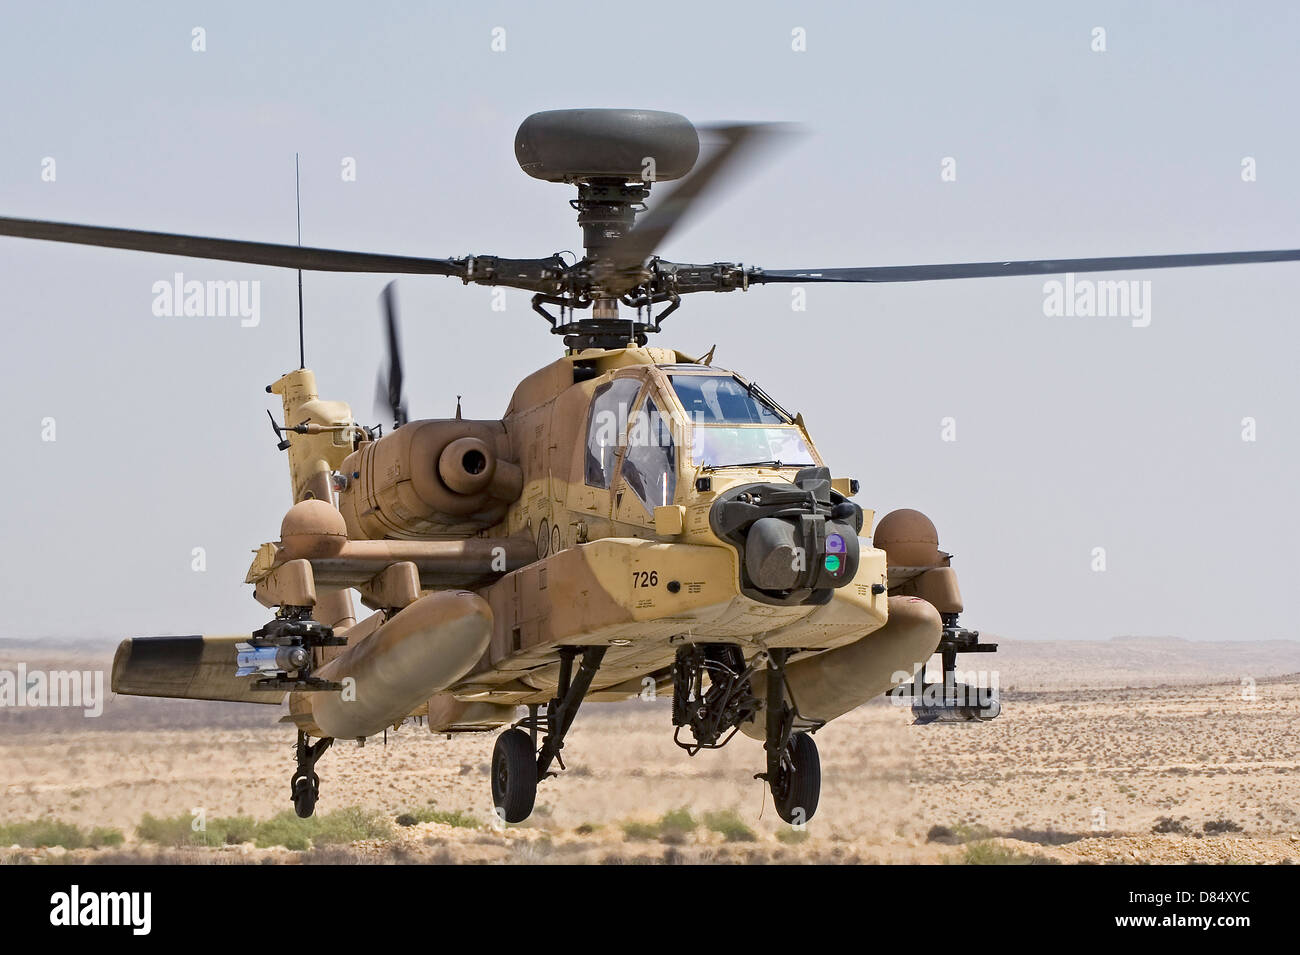 An AH-64D Saraf attack helicopter of the Israeli Air Force landing at Ramon Air Force Base, Israel Stock Photo - Alamy